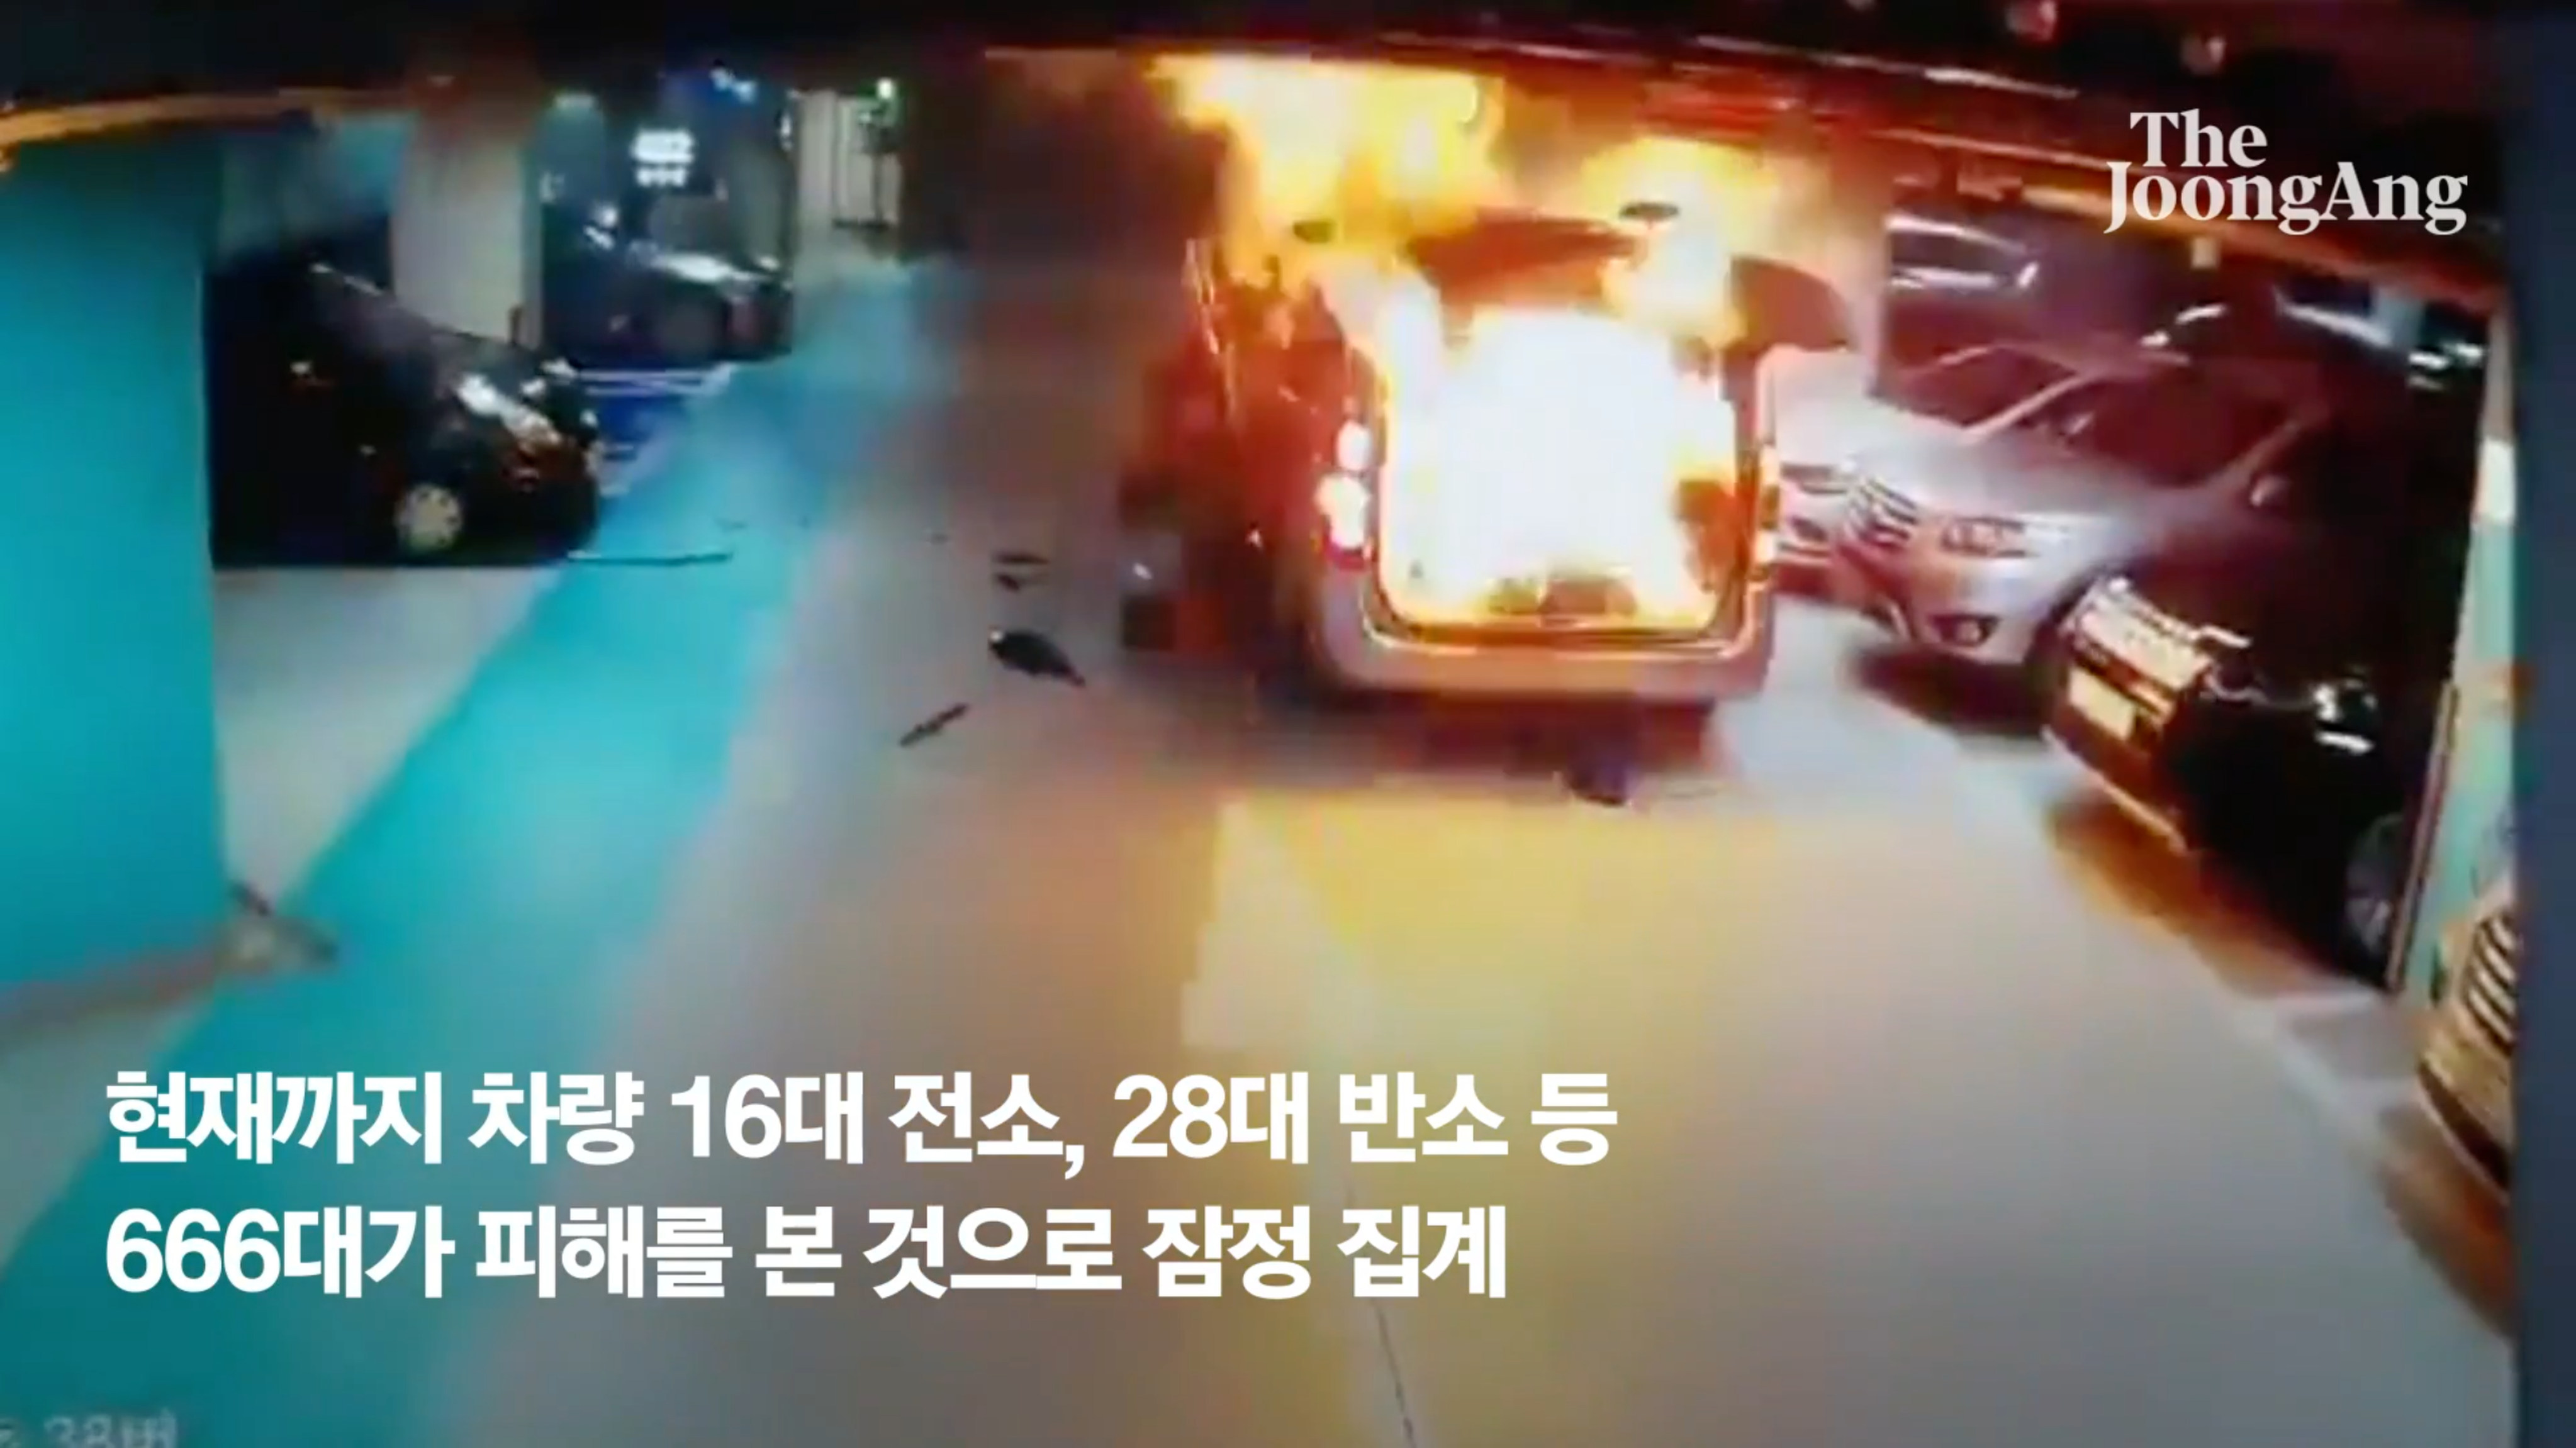 A mobile car washer was jailed in South Korea on Monday for lighting up next to a gas canister and sparking a fire that gutted the basement of an apartment block in the southern city of Cheonan where hundreds of cars were parked. Photo: Screen shot courtesy JoongAng video